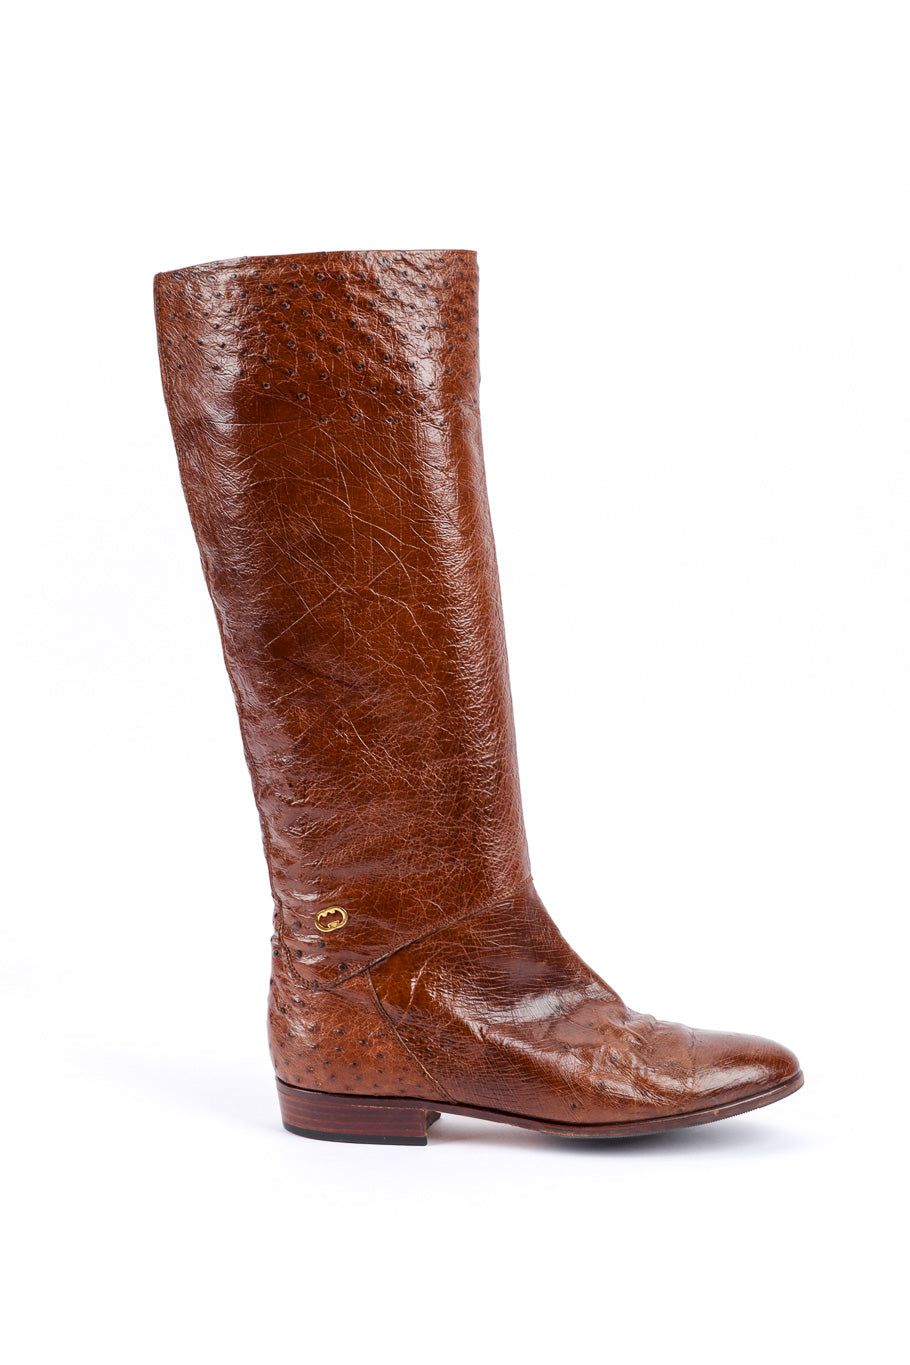 Vintage Gucci Brown Ostrich Leather Riding Boot right boot outer view @recessla